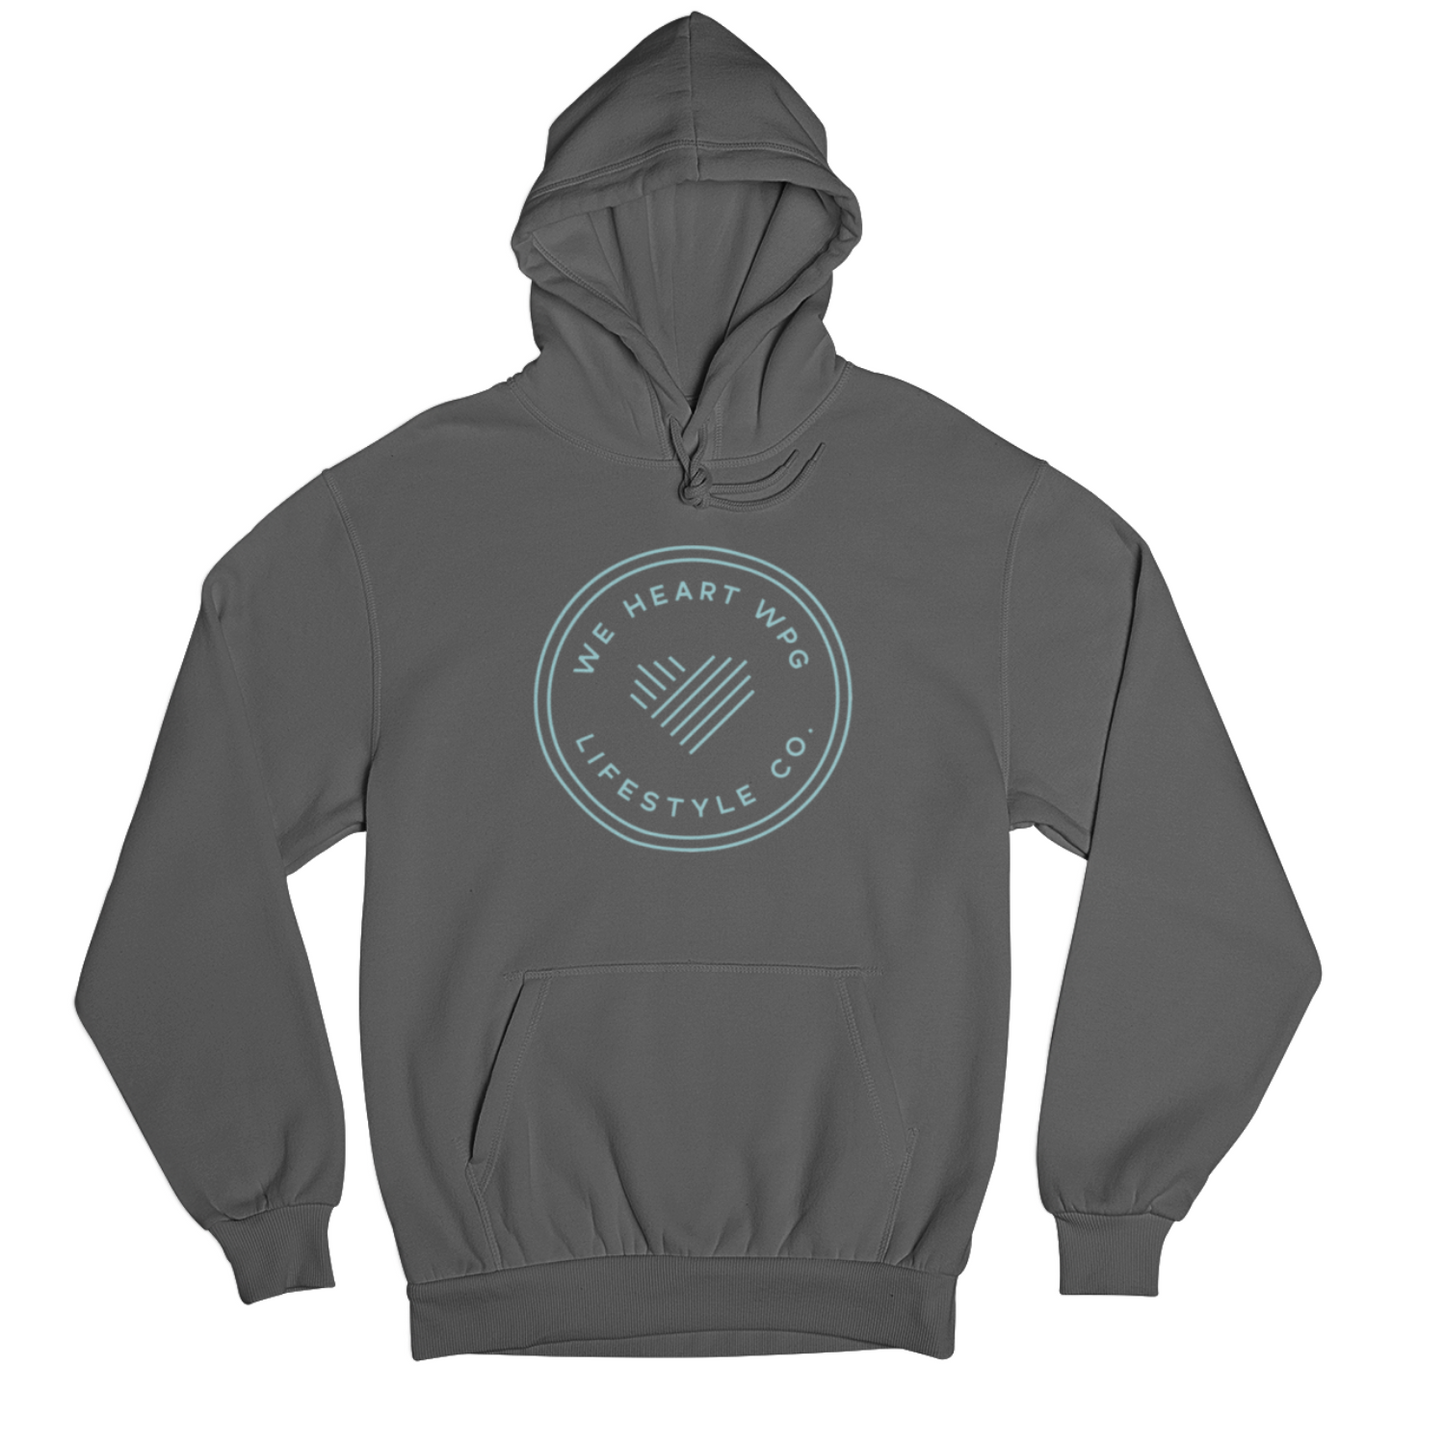 WHW Lifestyle Hoodie | Teal on Charcoal